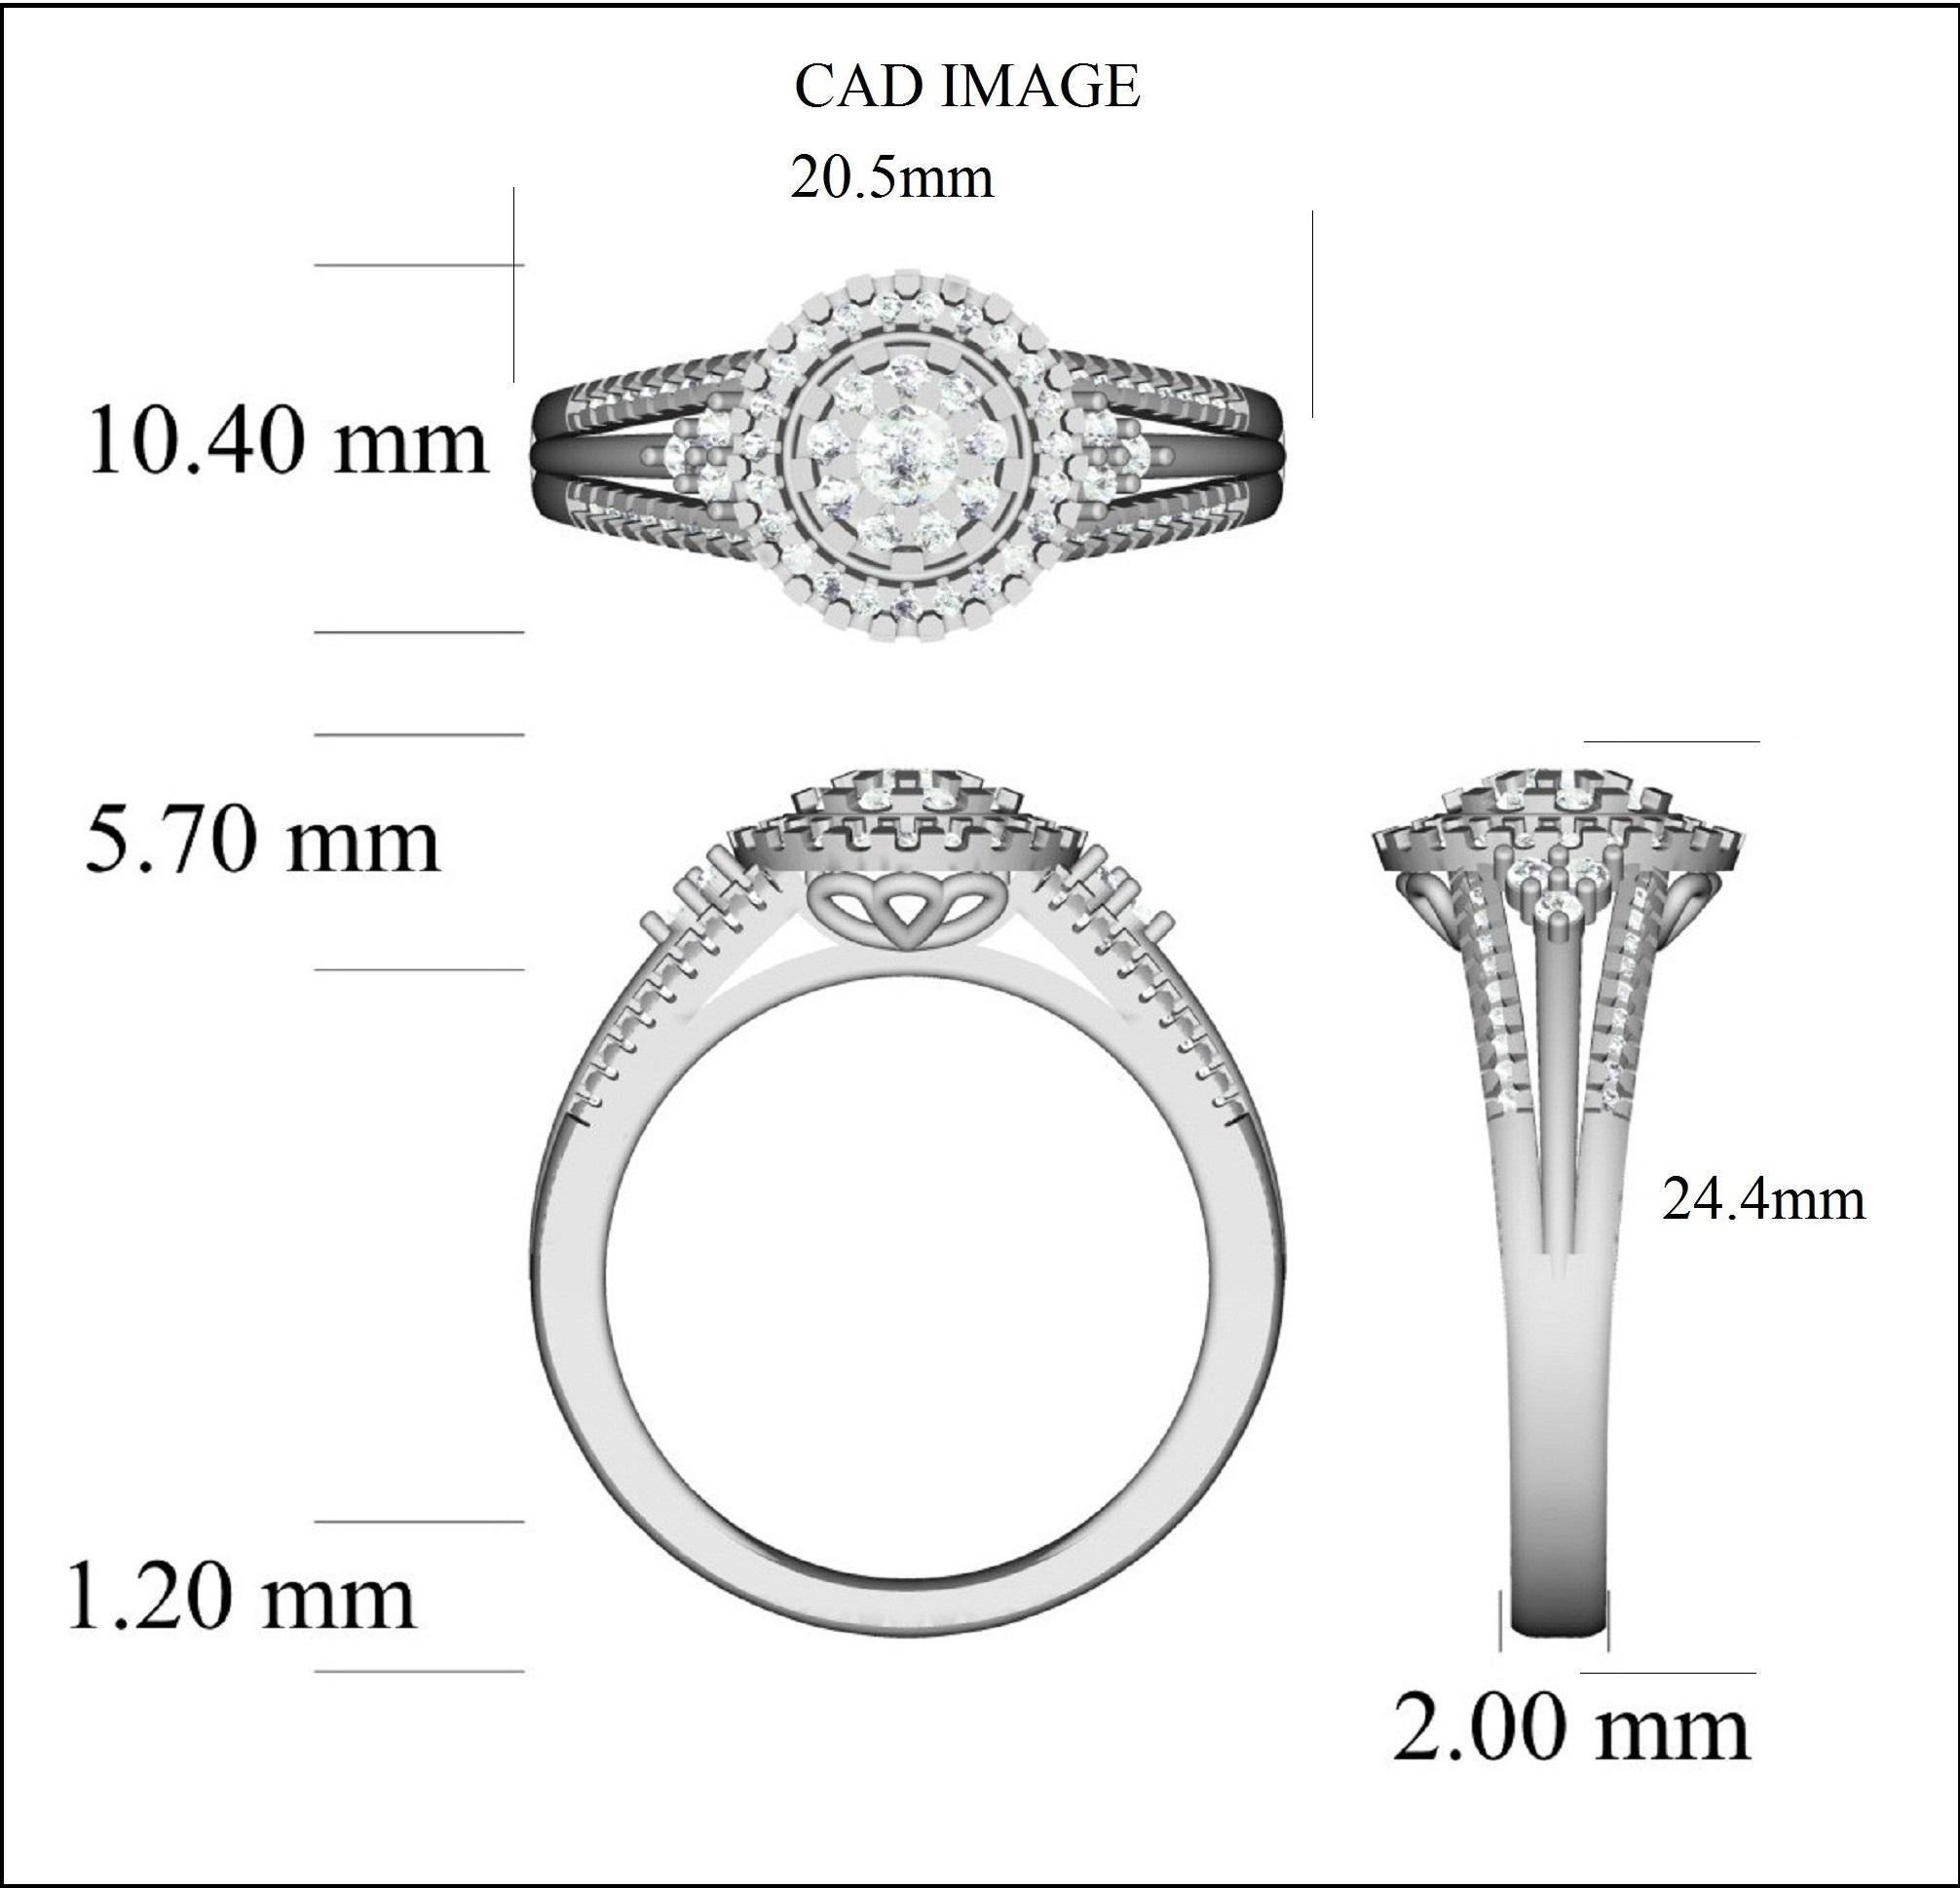 Exquisite 14K white gold halo ring featuring cluster design with split shank and jeweled with 75 white diamonds. This ring is superbly detailed to perfection and set with 0.50 carat of sparkling brilliant cut round diamonds in secured prong setting.